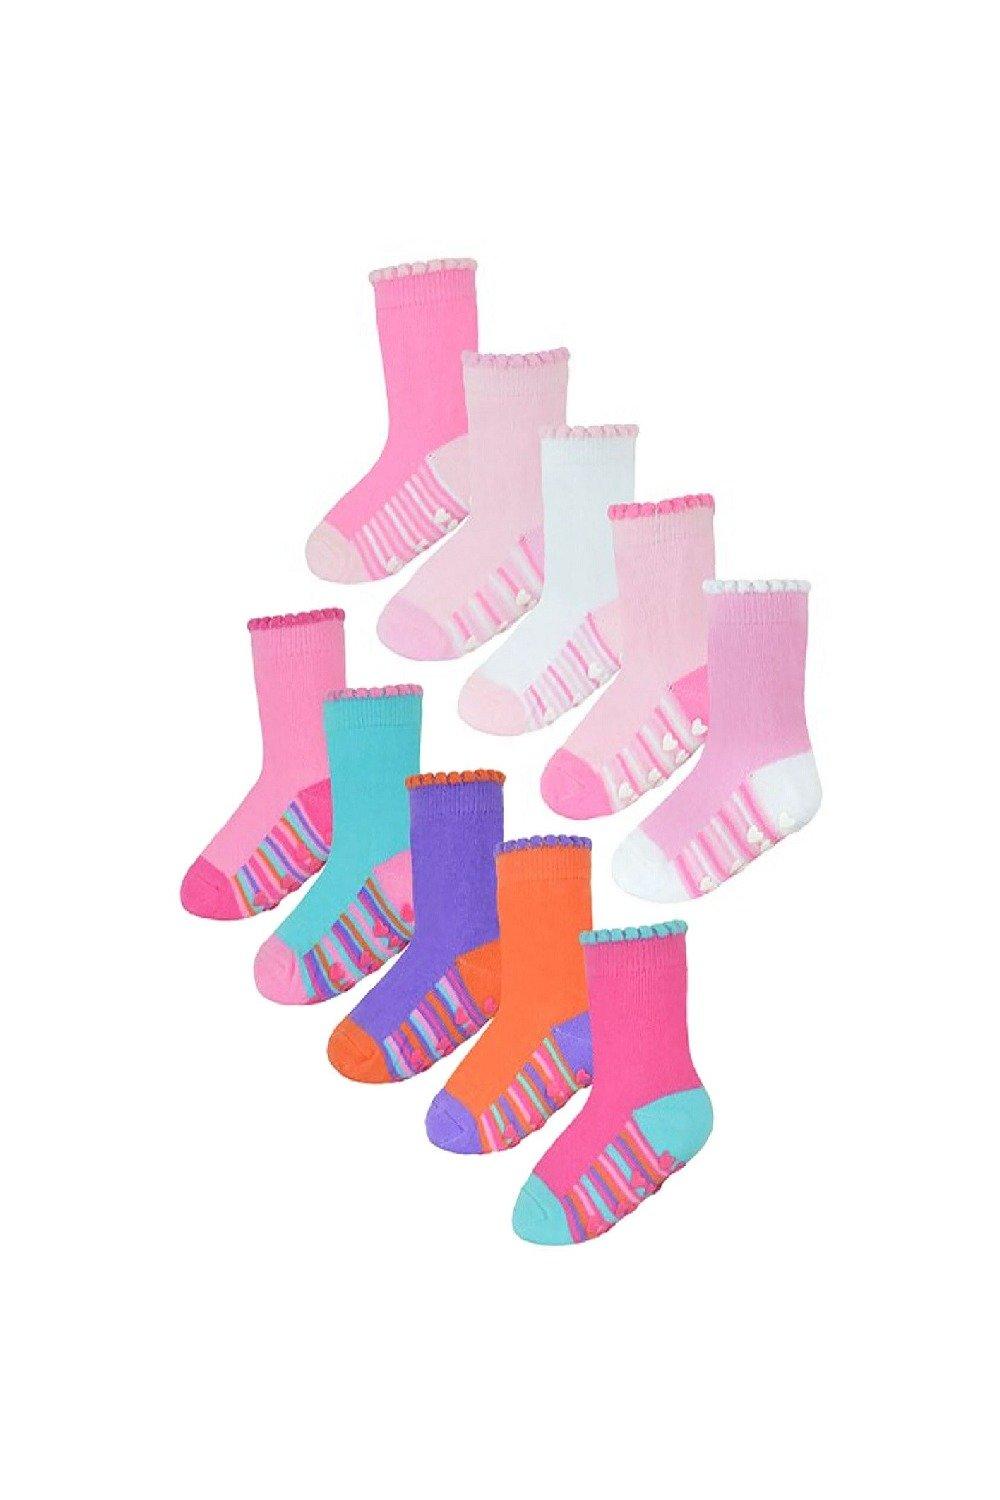 10 Pairs Non Slip Heel & Toe Cute Soft Socks with Grips for Babies